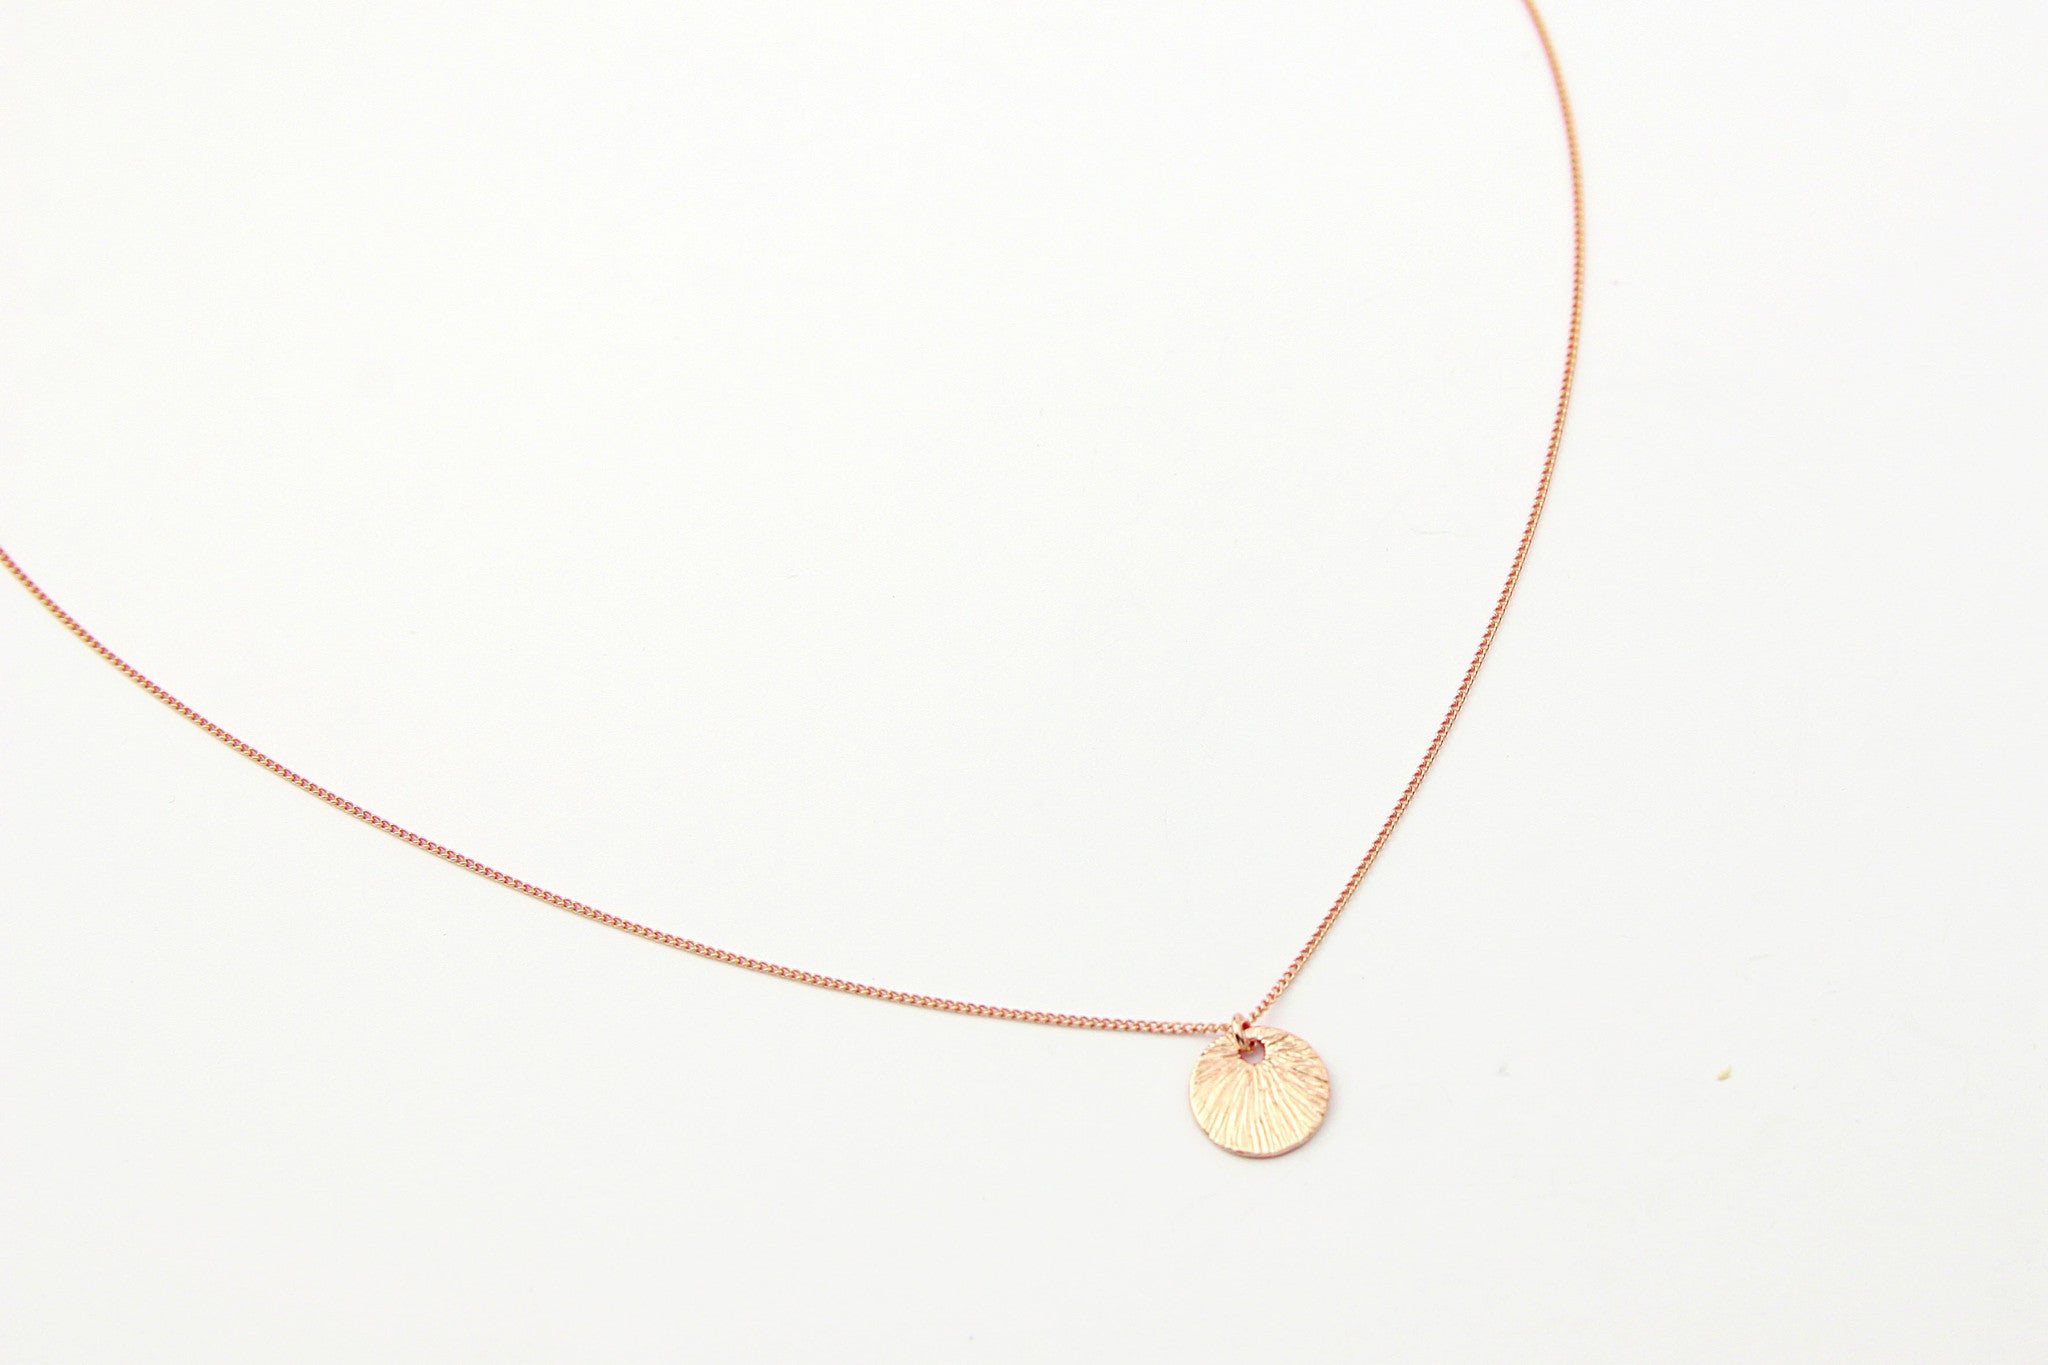 jewelberry necklace kette small shell curb chain rose gold plated sterling silver fine jewelry handmade with love fairtrade